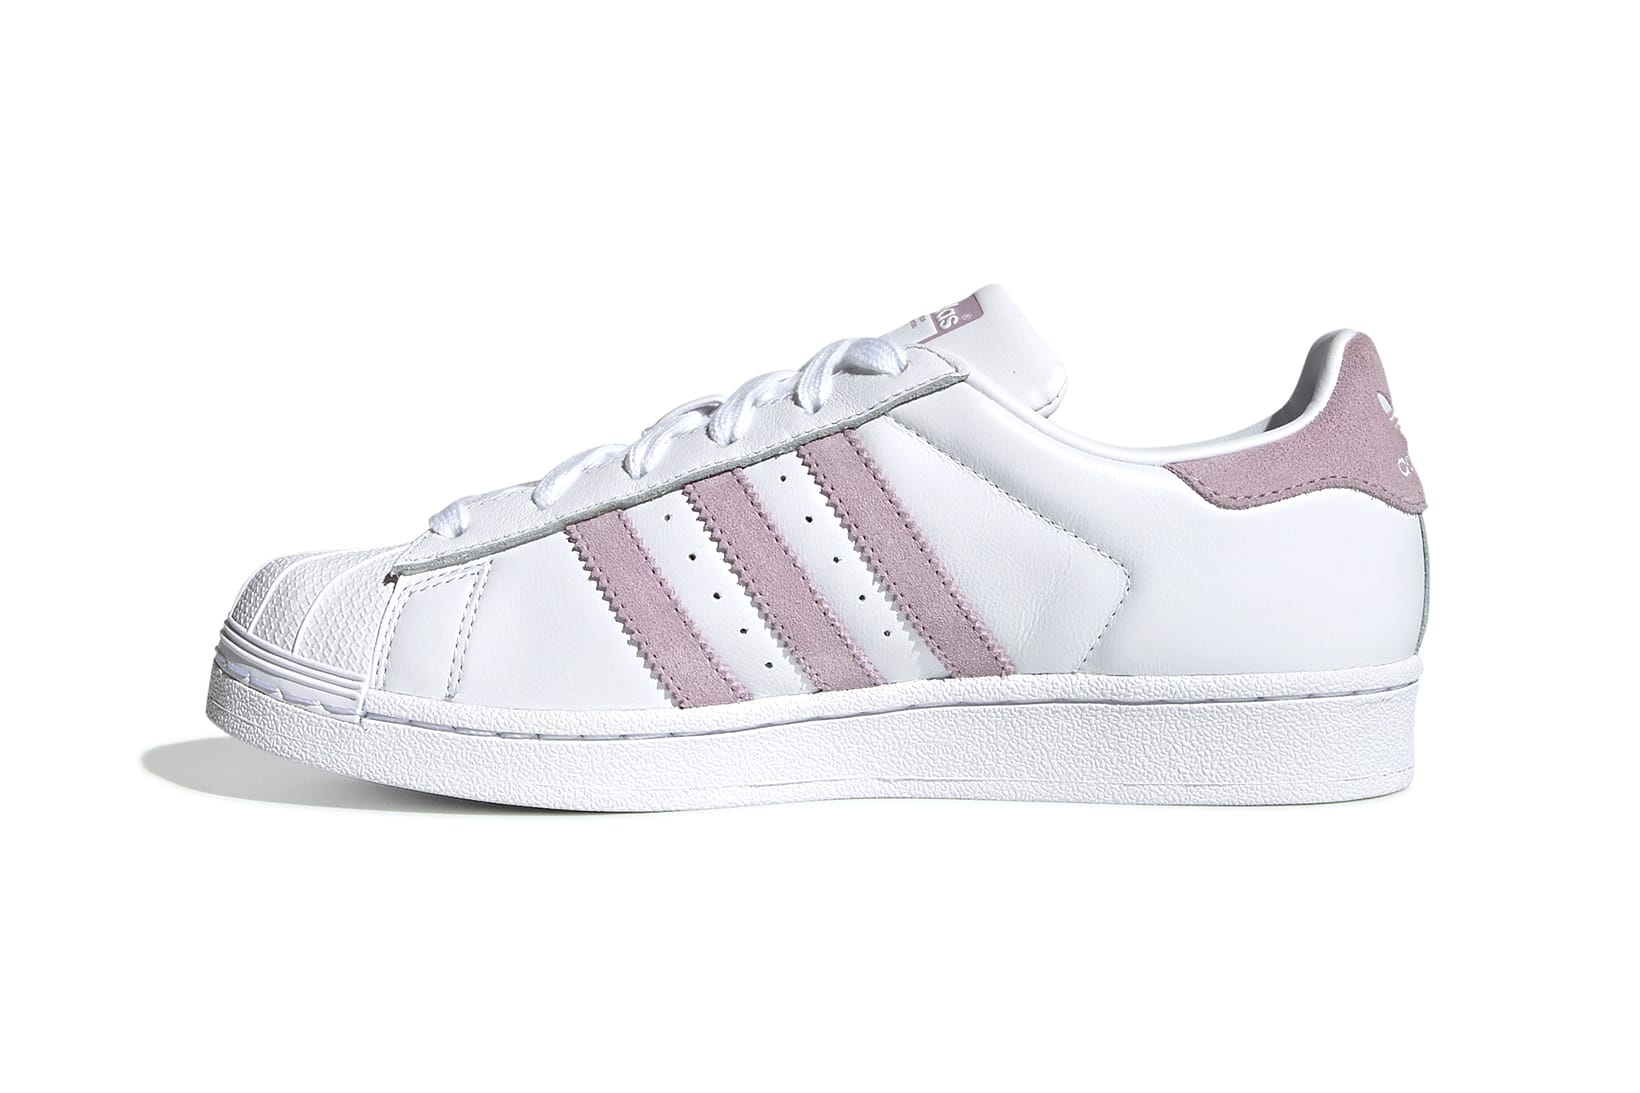 black adidas shoes with pink stripes